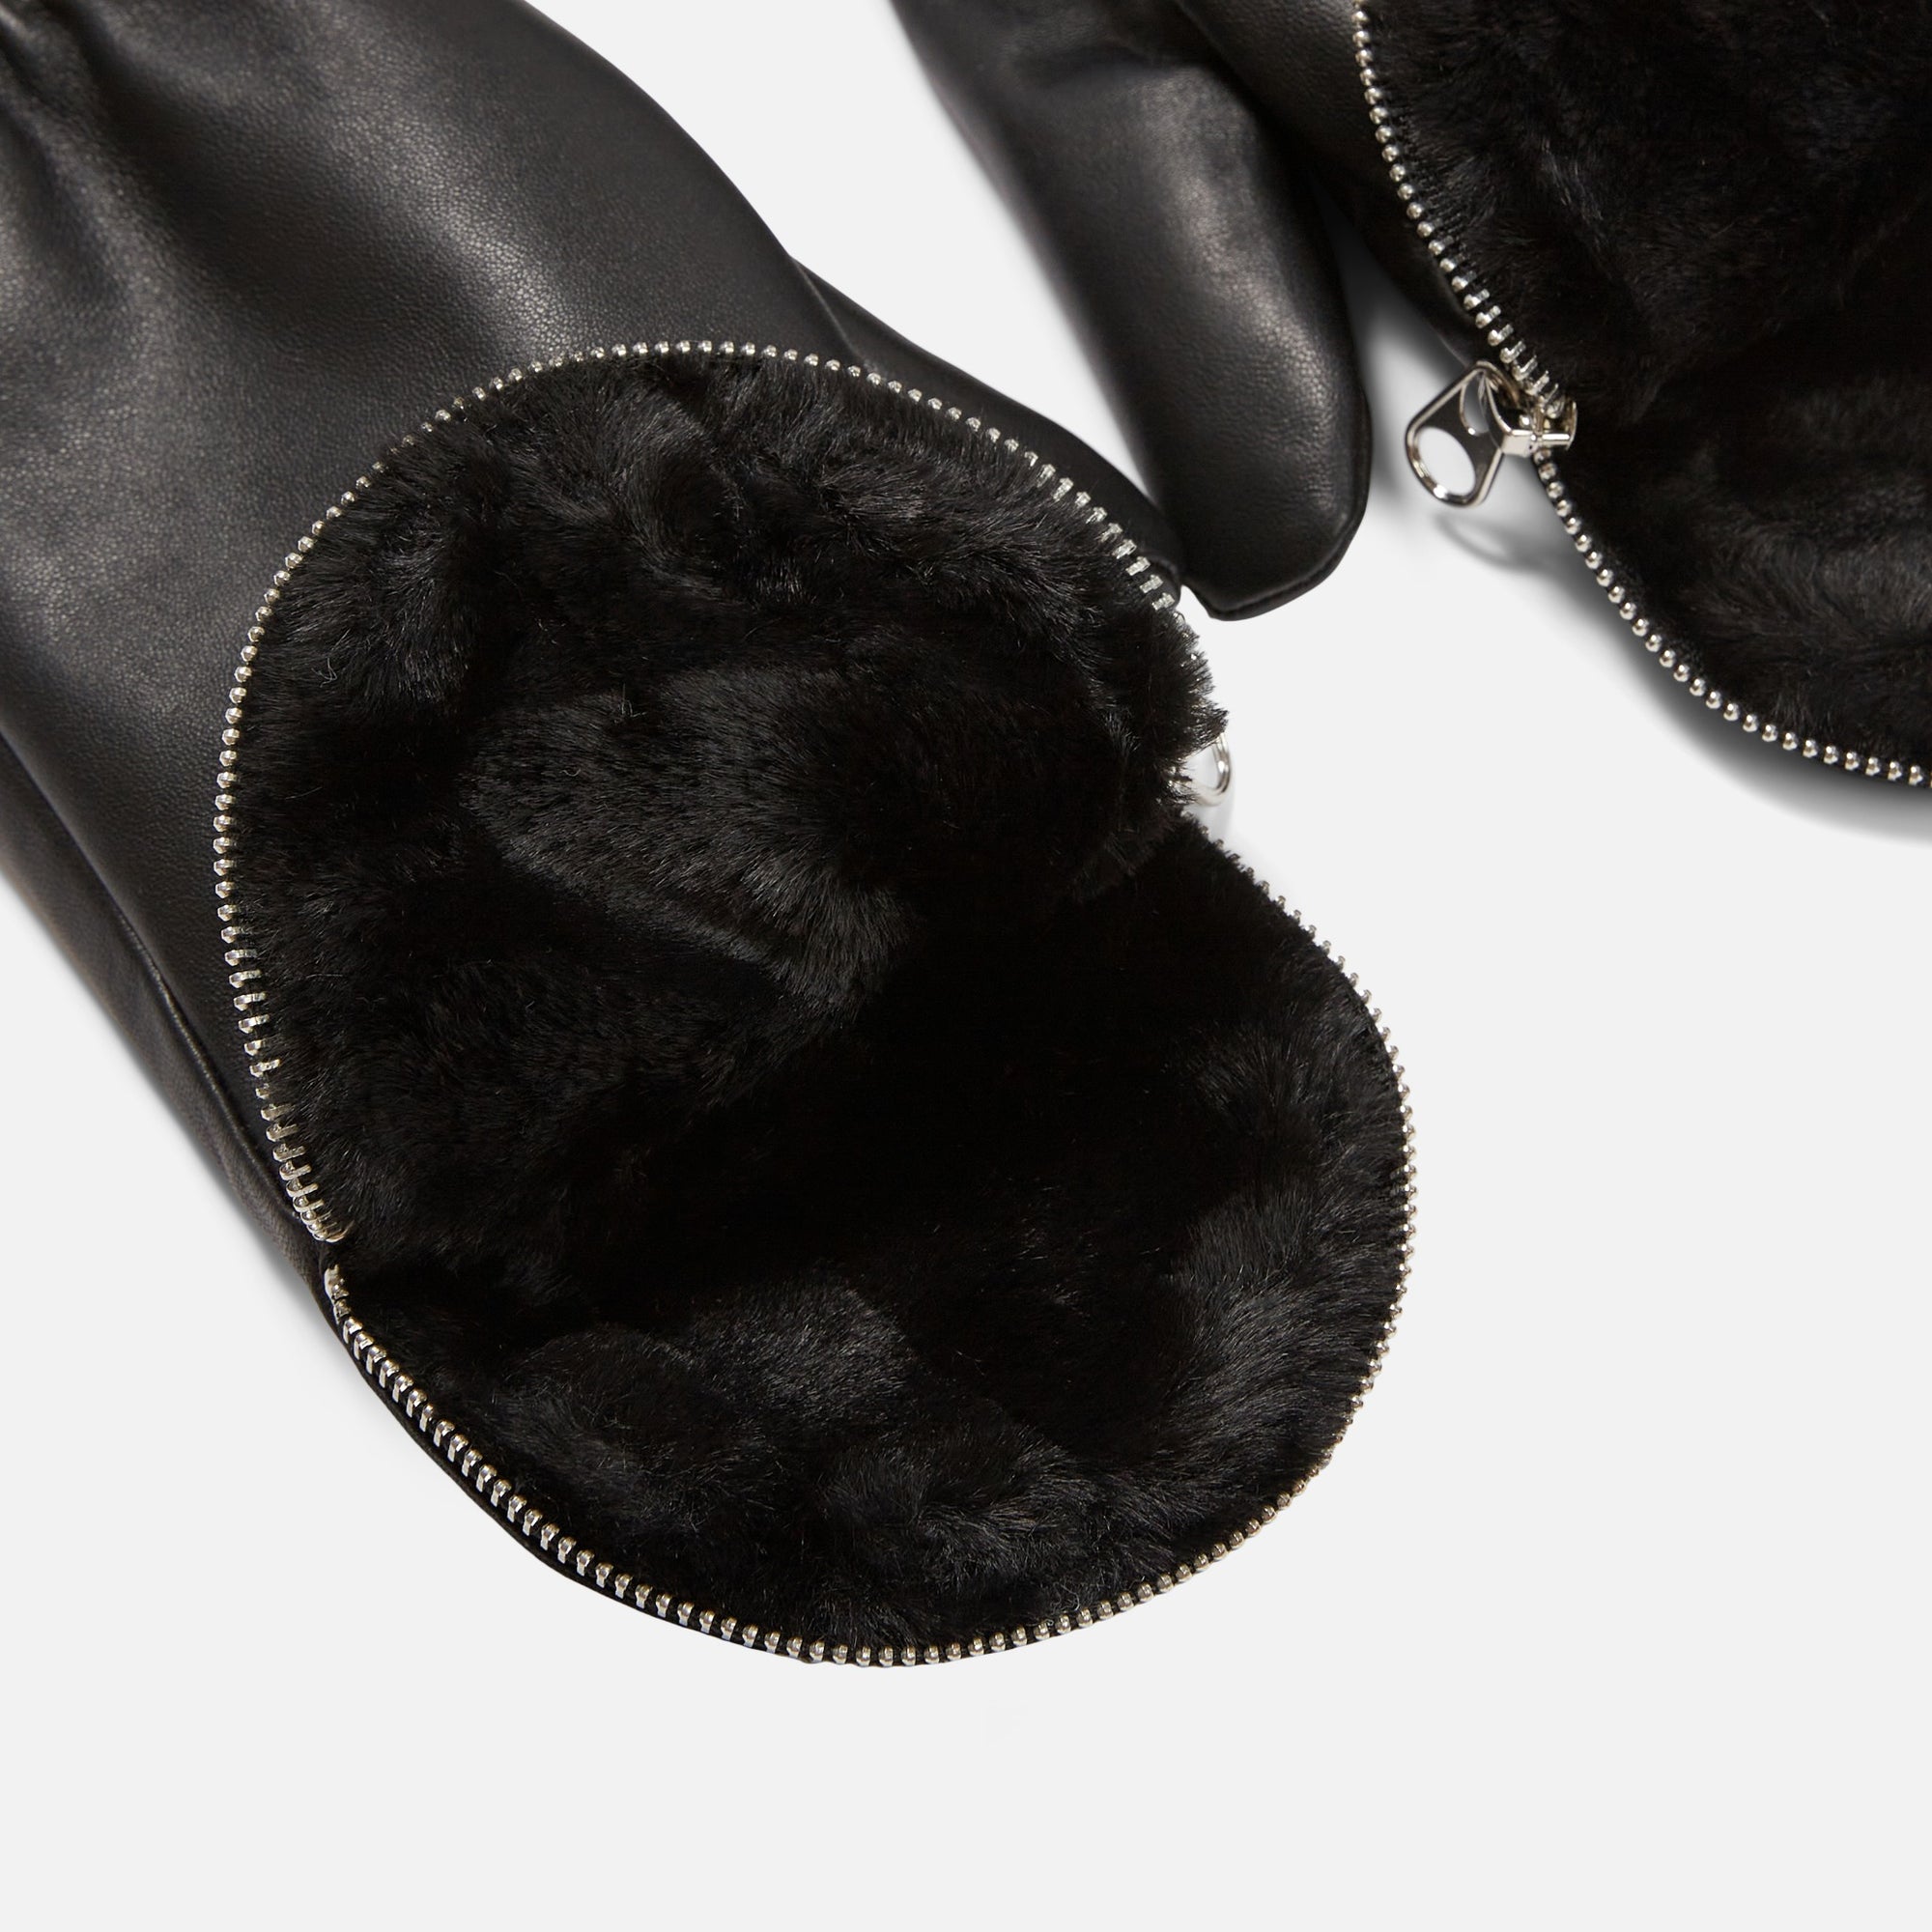 Black leather mittens with zipper